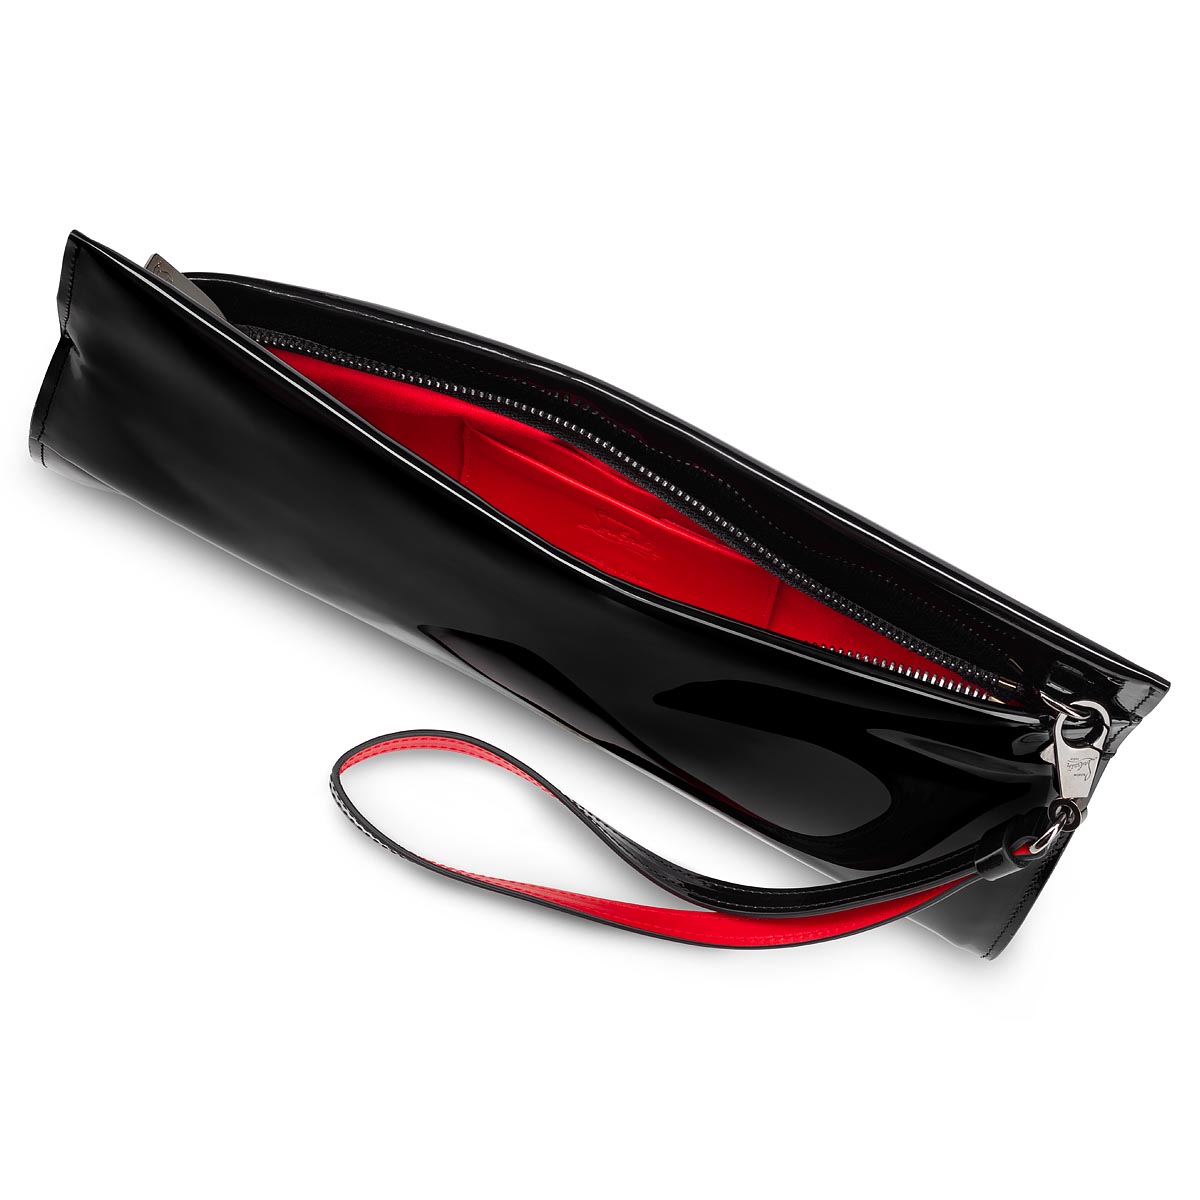 Christian Louboutin Loubicute Clutch Bag in Black Leather with